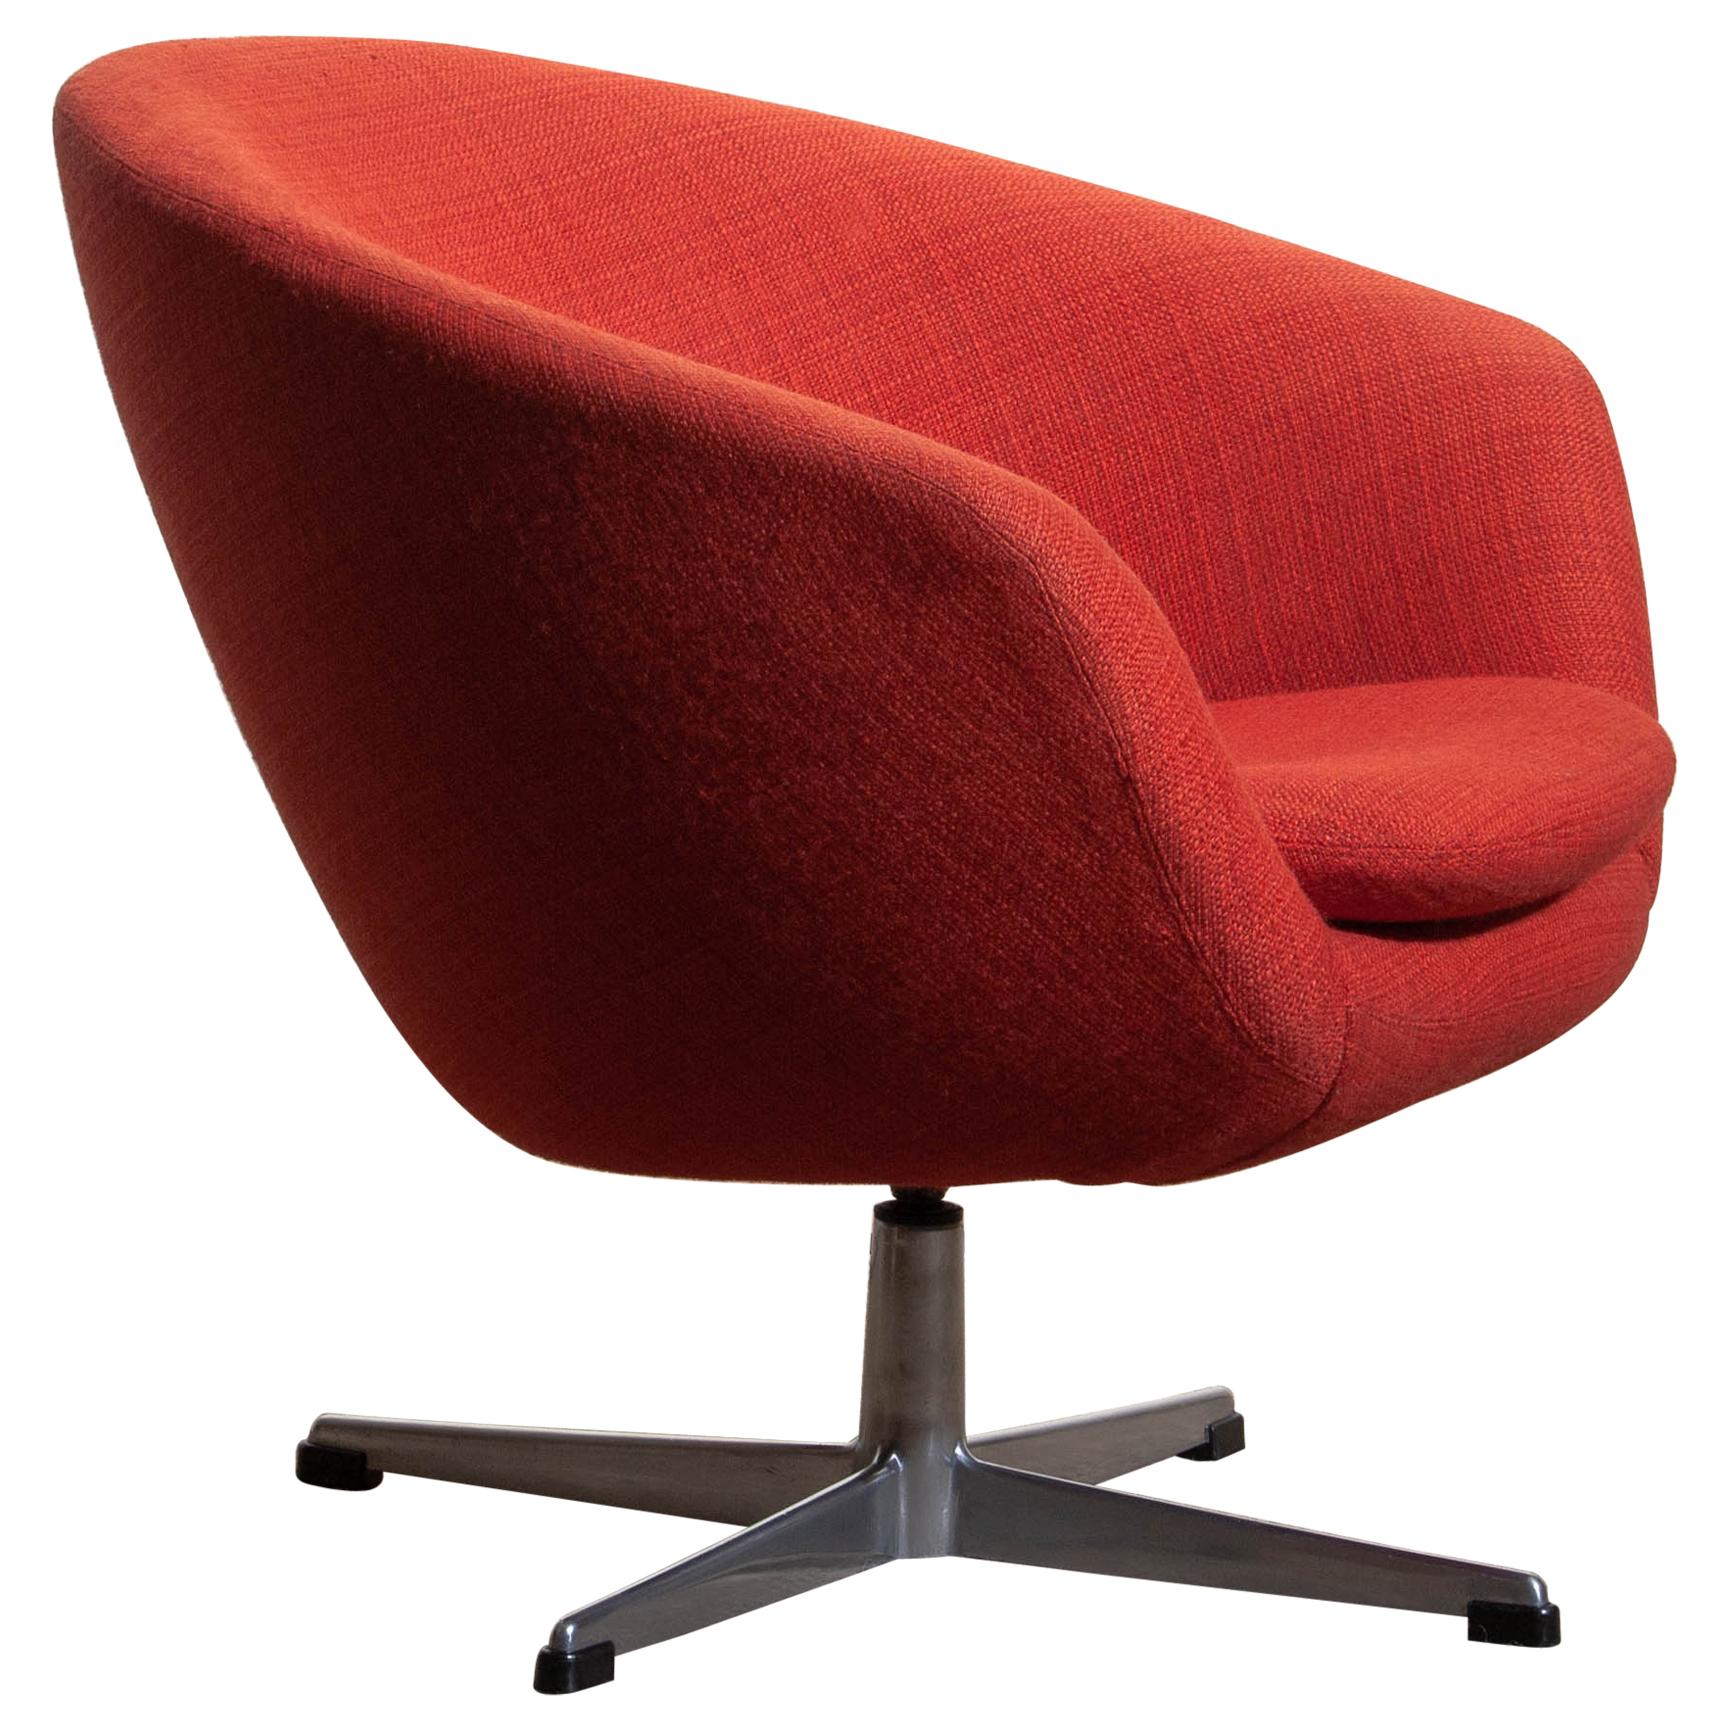 Mid-Century Modern 1960s, Swivel Lounge Chair by Carl Eric Klote for Overman, Denmark